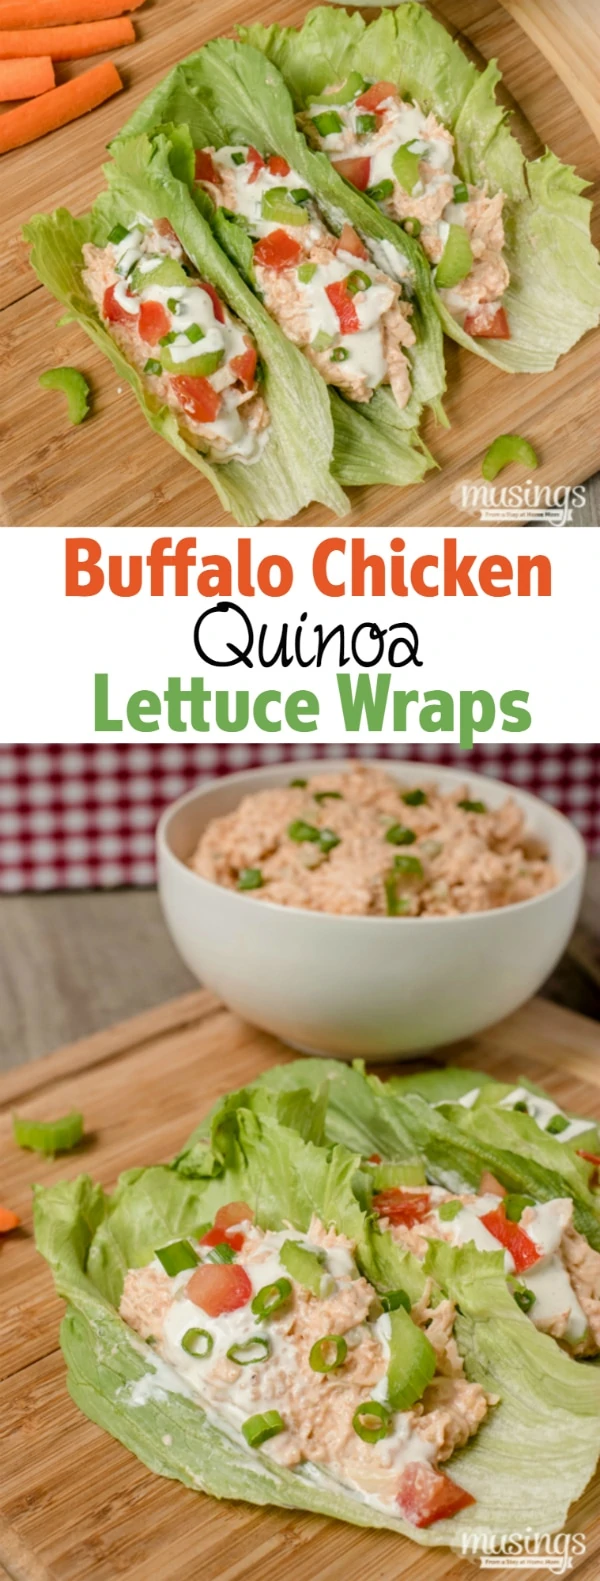 Buffalo Chicken Quinoa Lettuce Wraps are a perfect lunch or quick and easy dinner; you'll love how spicy and tangy this deliciously low carb recipe is!